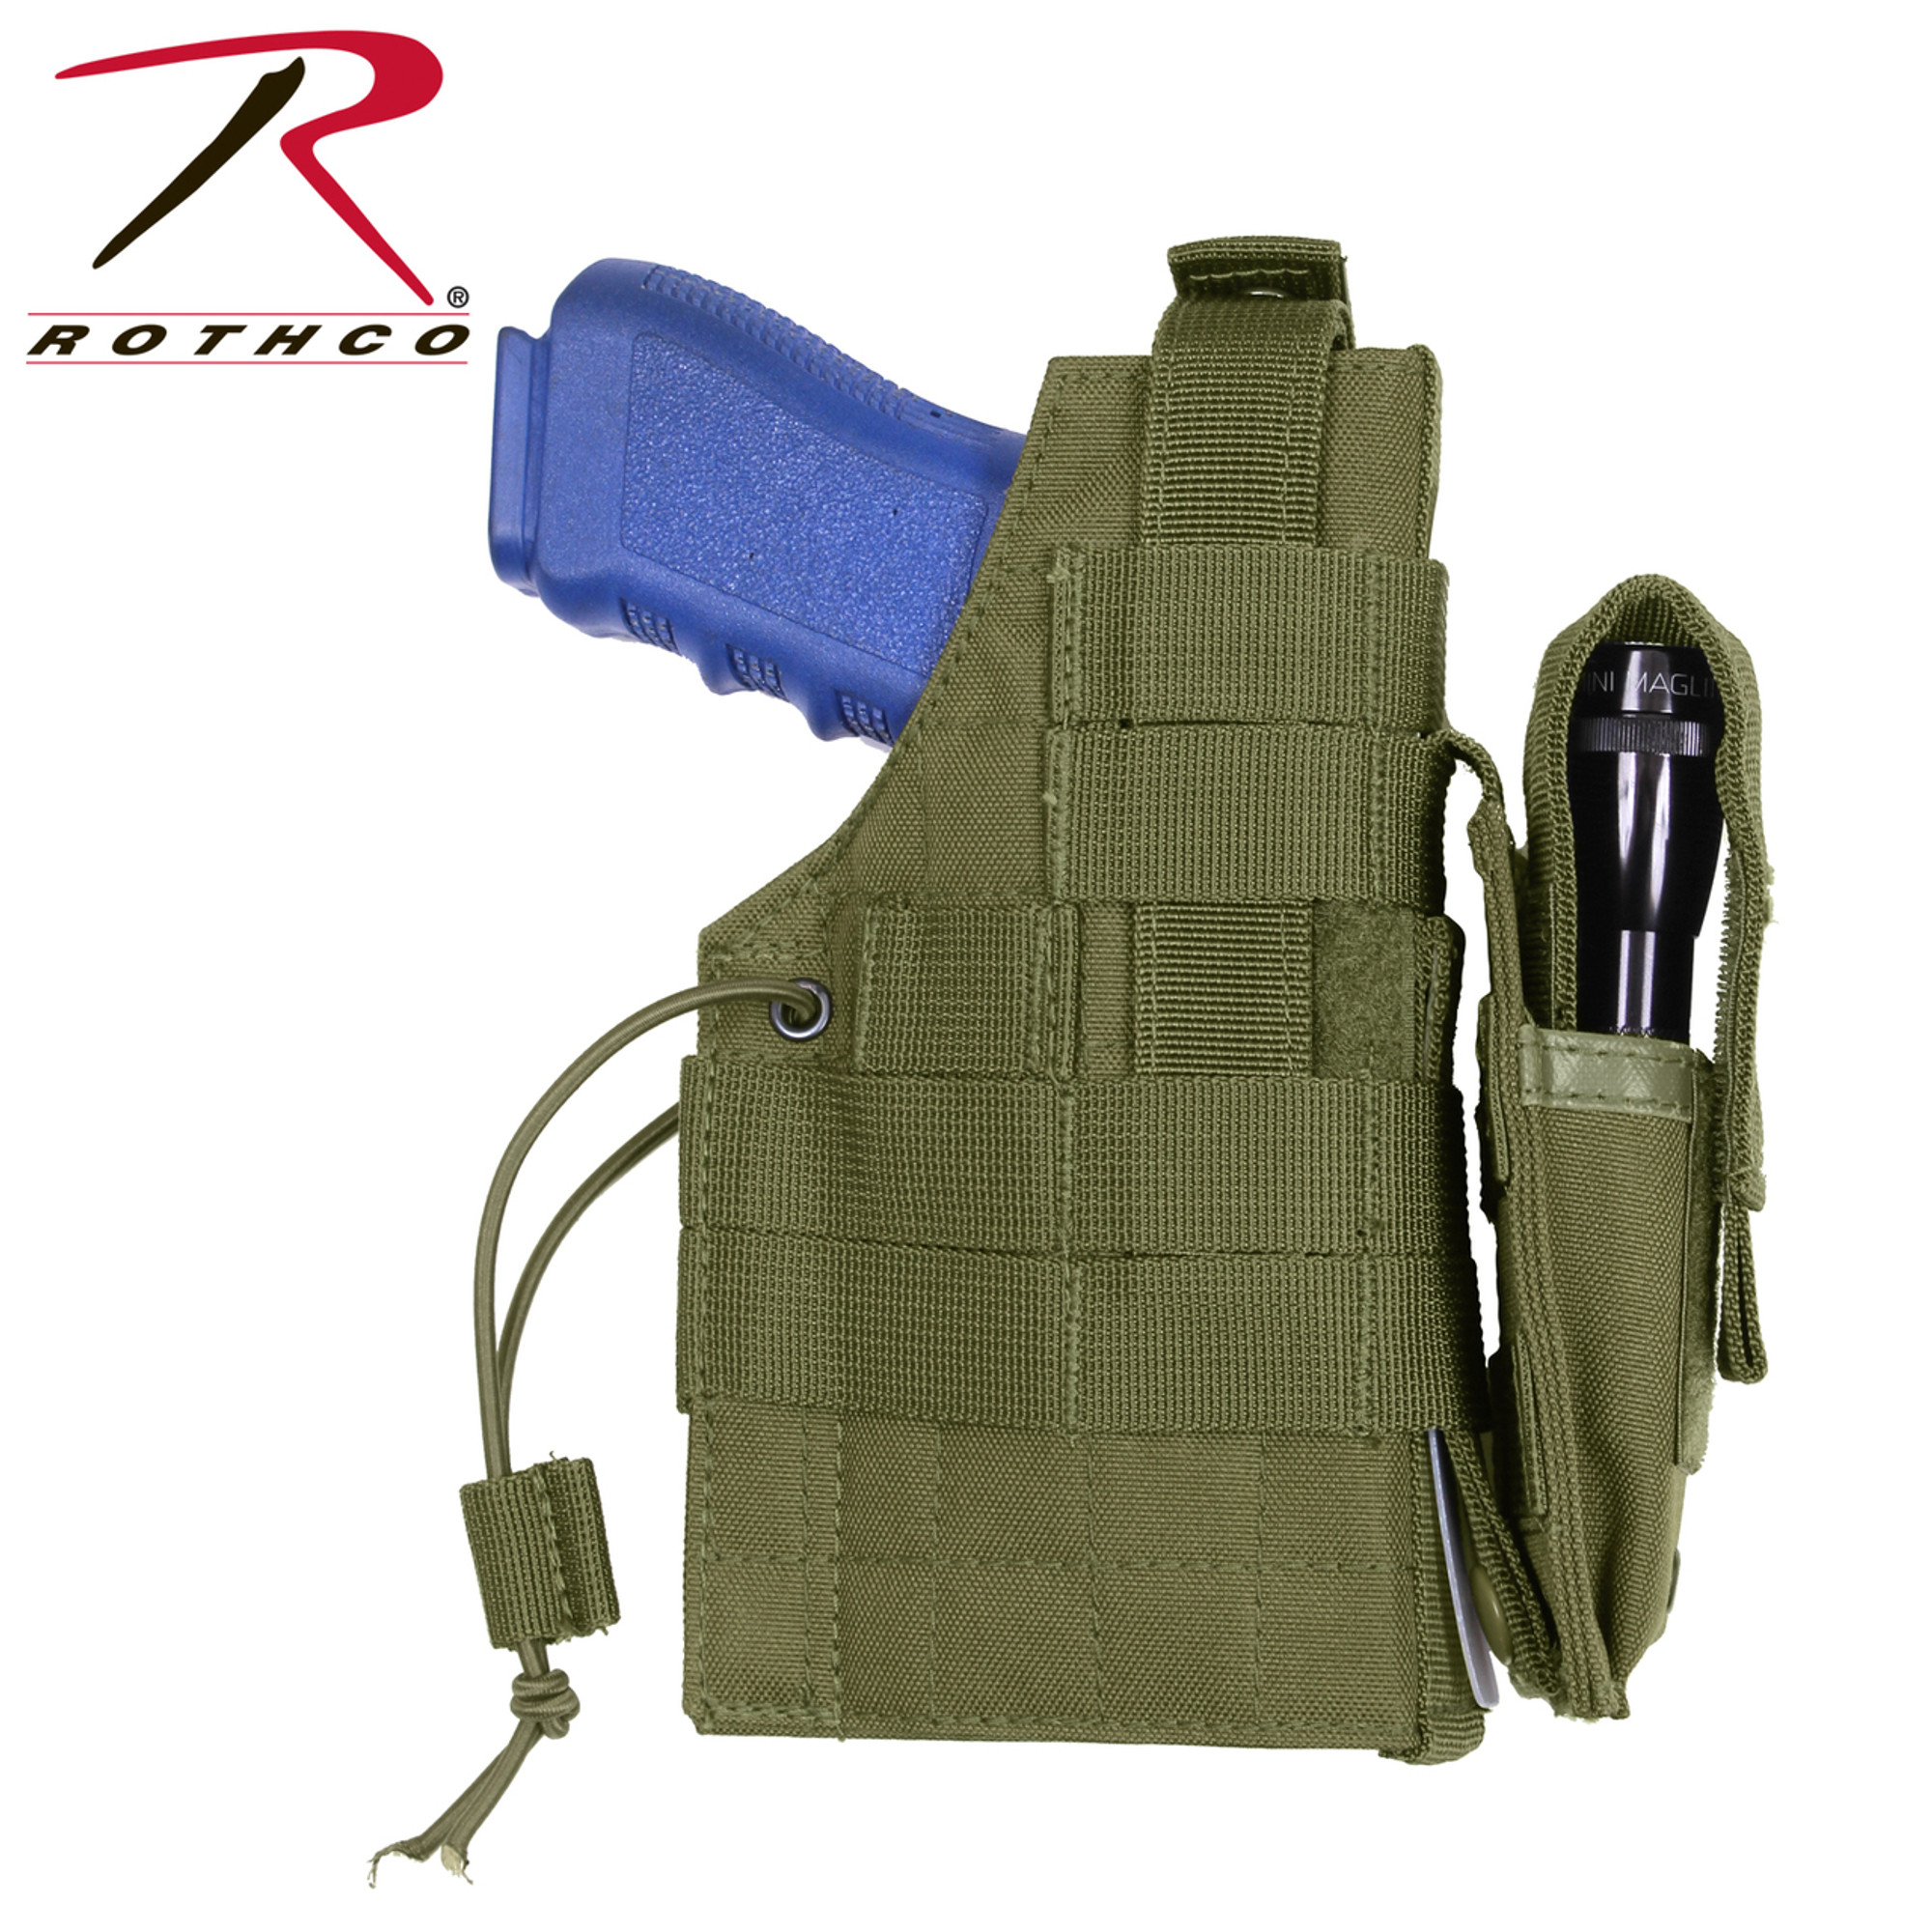 Rothco MOLLE Modular Ambidextrous Holster - Olive Drab